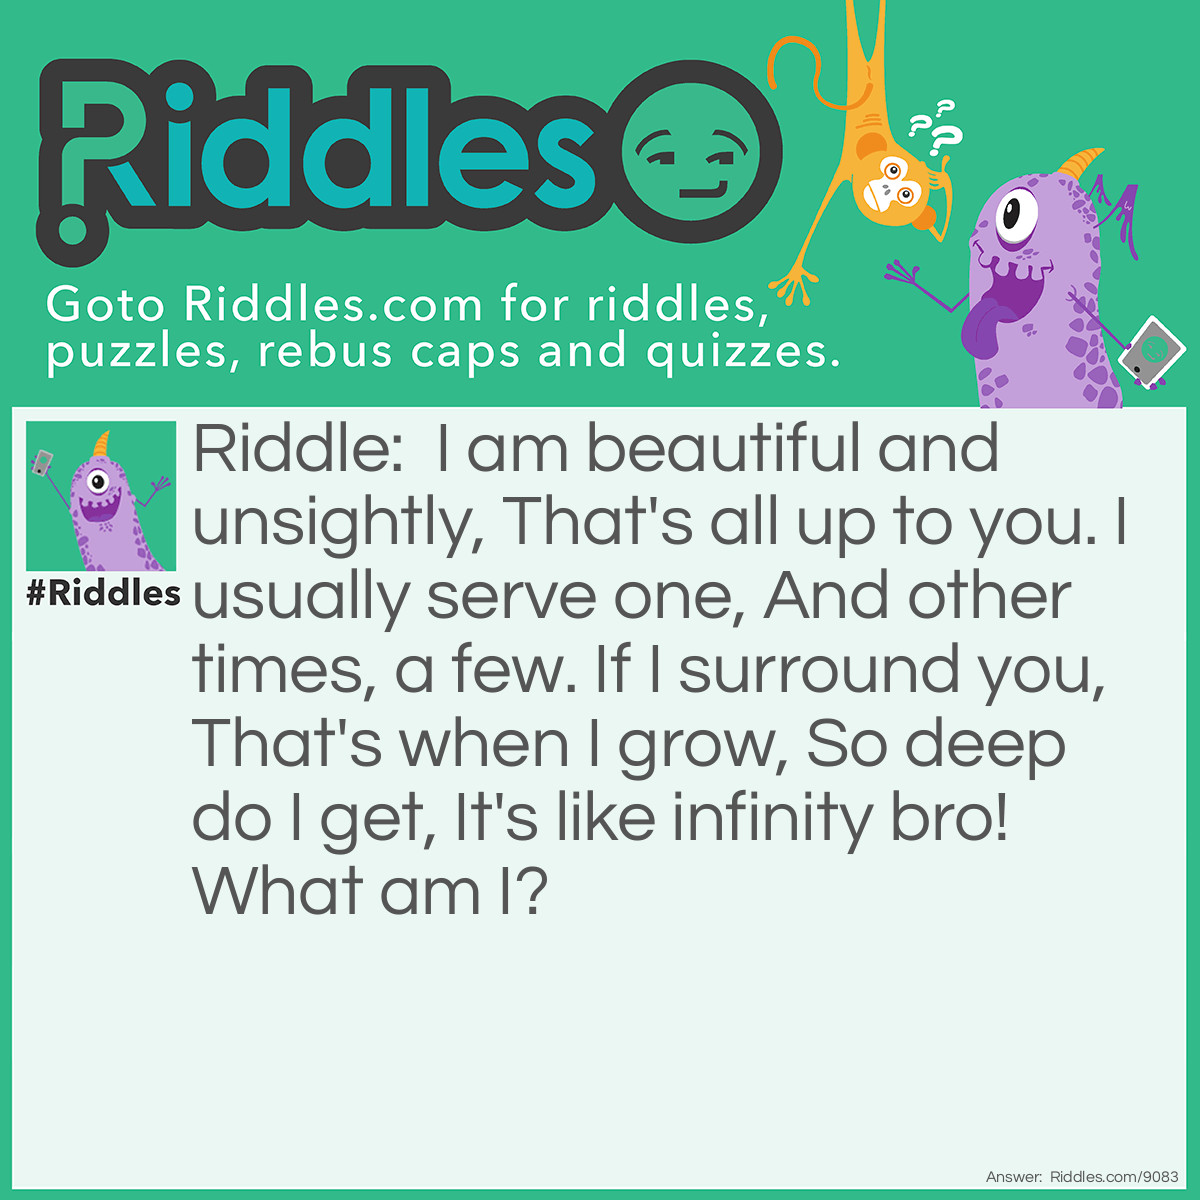 Riddle: I am beautiful and unsightly, That's all up to you. I usually serve one, And other times, a few. If I surround you, That's when I grow, So deep do I get, It's like infinity bro! What am I? Answer: A mirror.